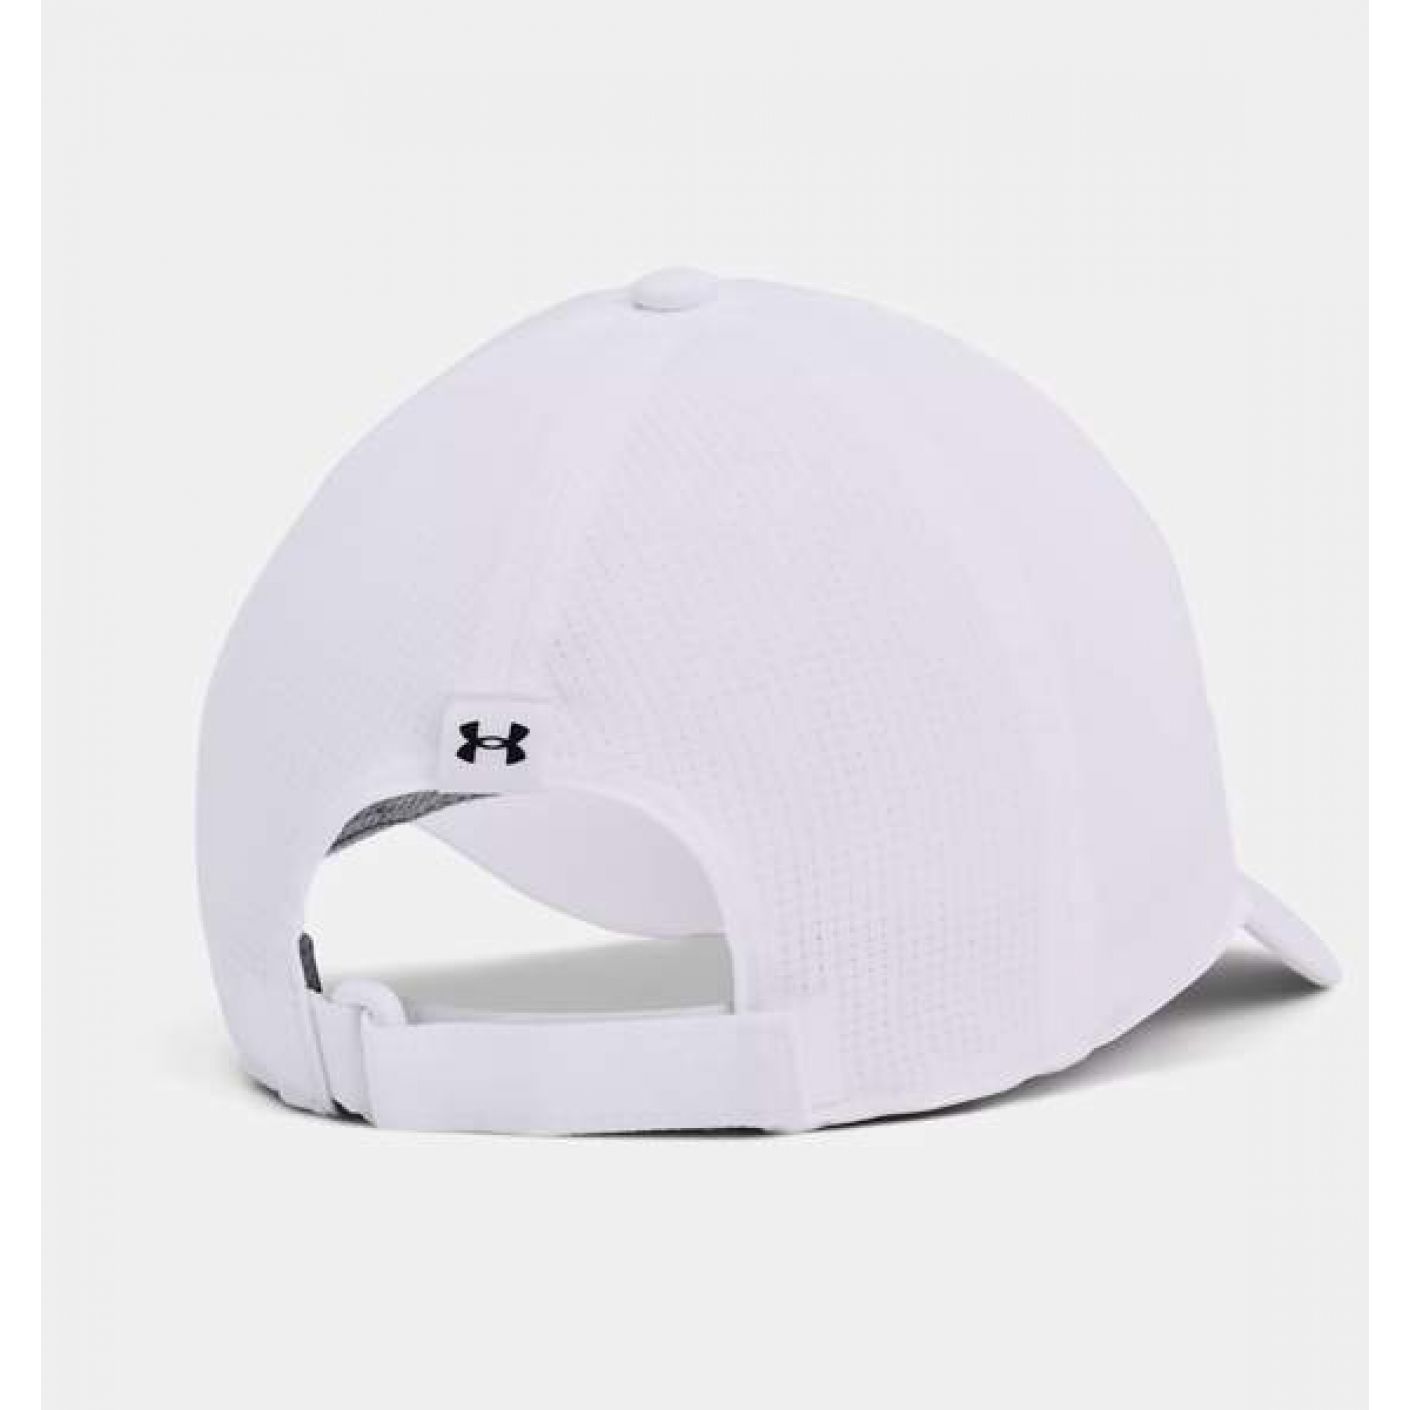 Under Armour Isochill Armourvent Adjustable White